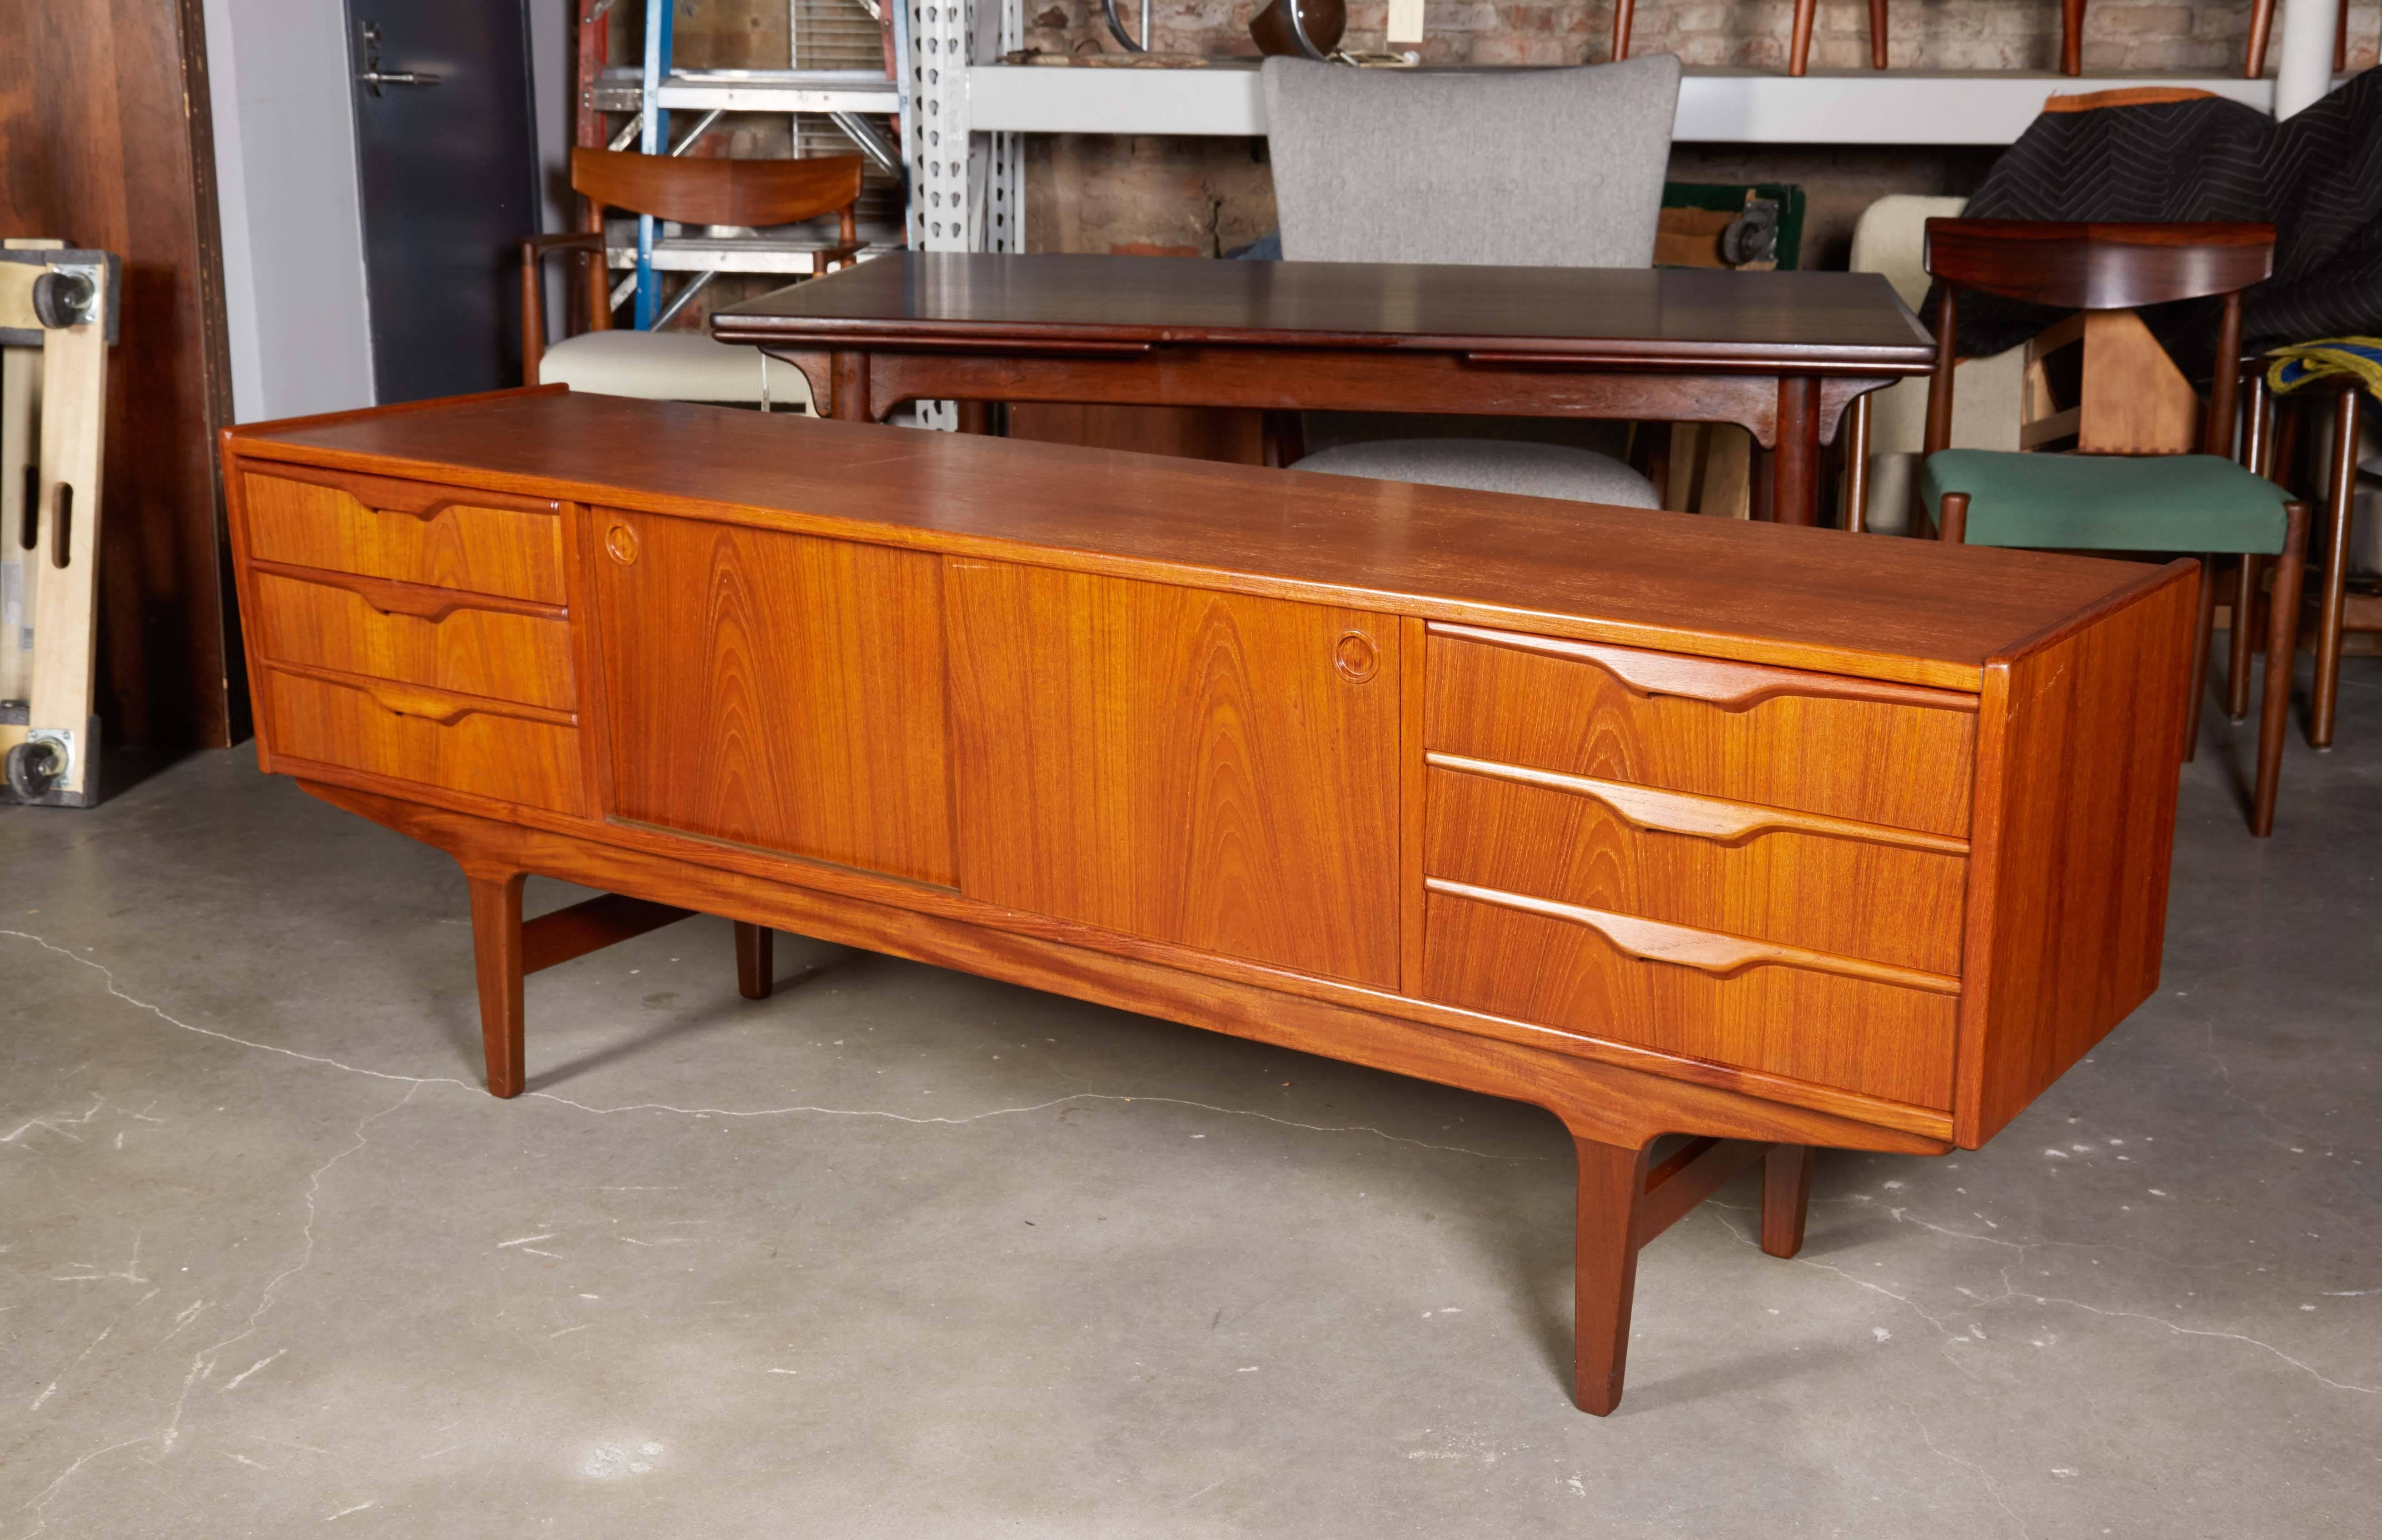 Mid Century 1960s Danish Sideboard

This vintage sideboard is in excellent condition. The height is rare from this period and the combination of sliding doors and drawers works well in any room where you need storage. Ready for pick up, delivery, or